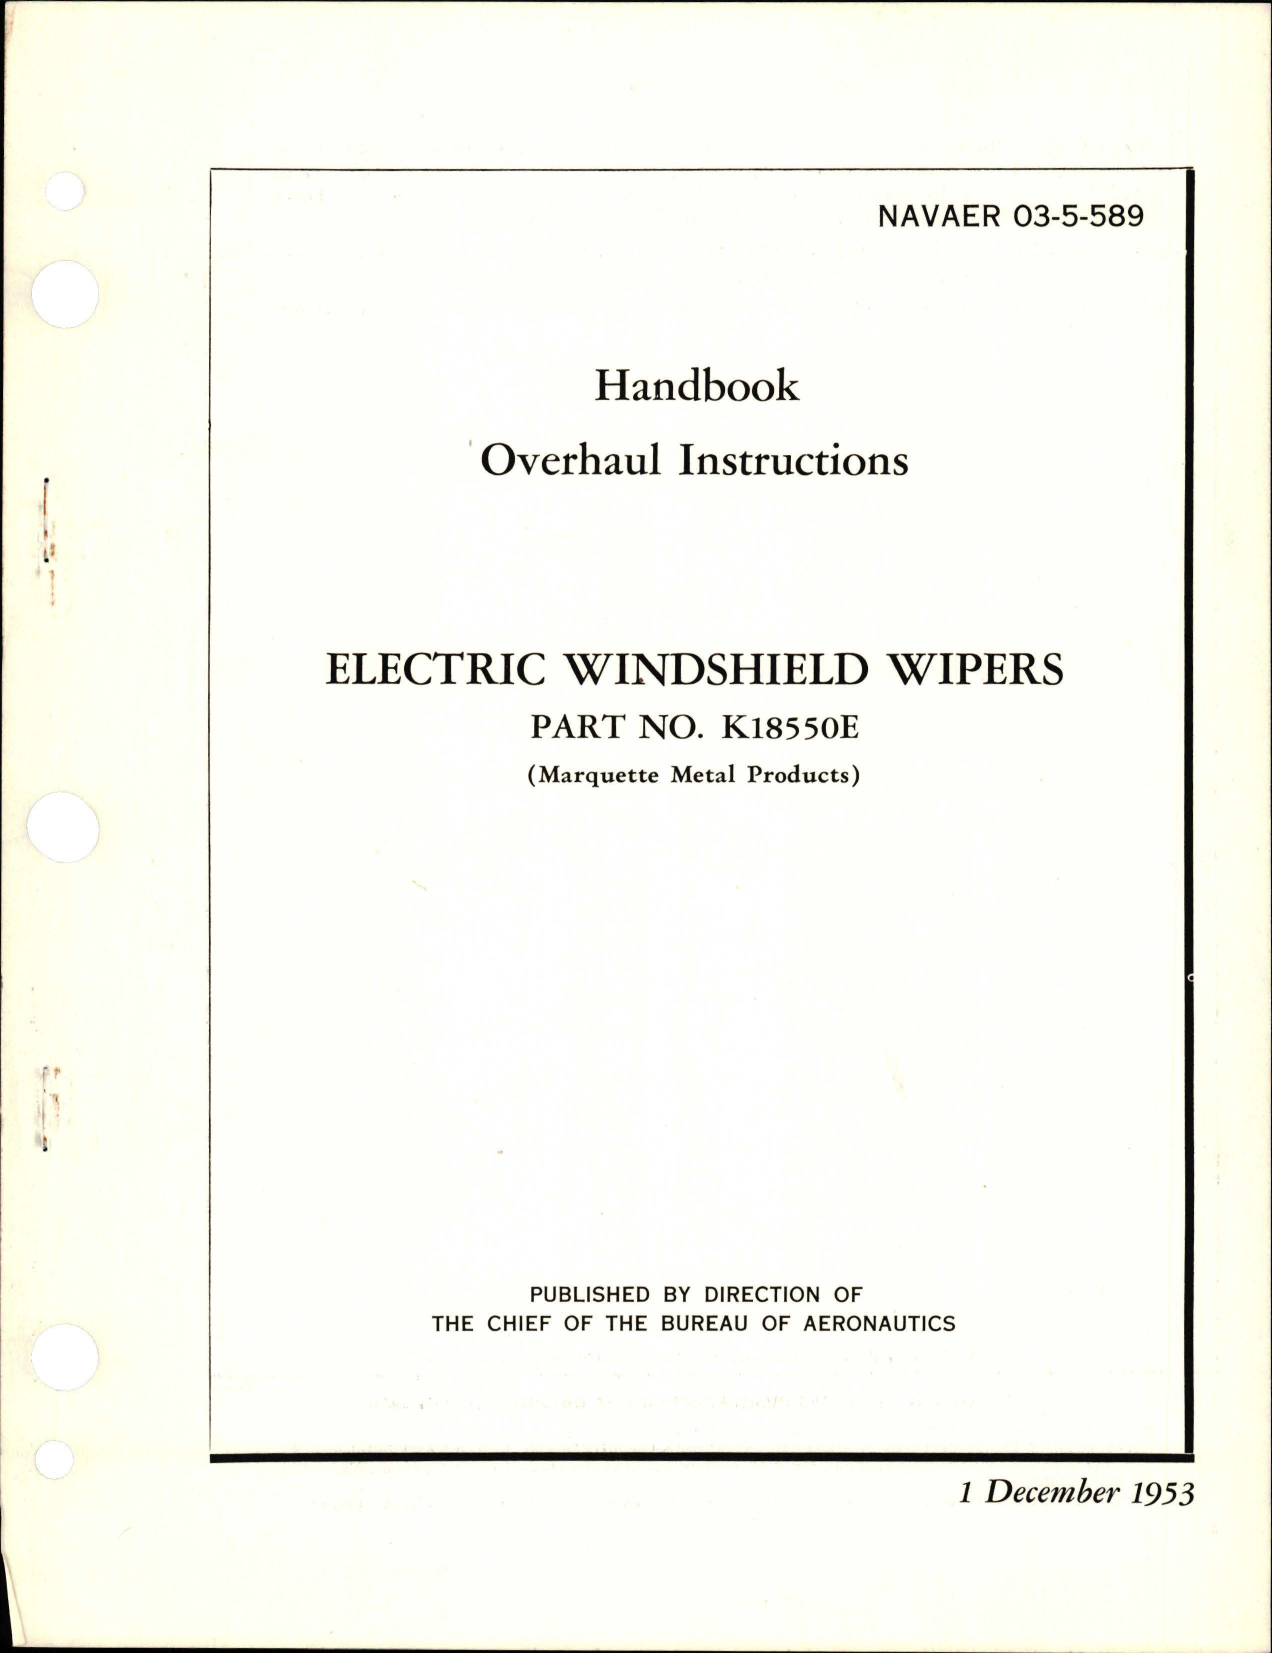 Sample page 1 from AirCorps Library document: Overhaul Instructions for Electric Windshield Wipers - Part K18550E 